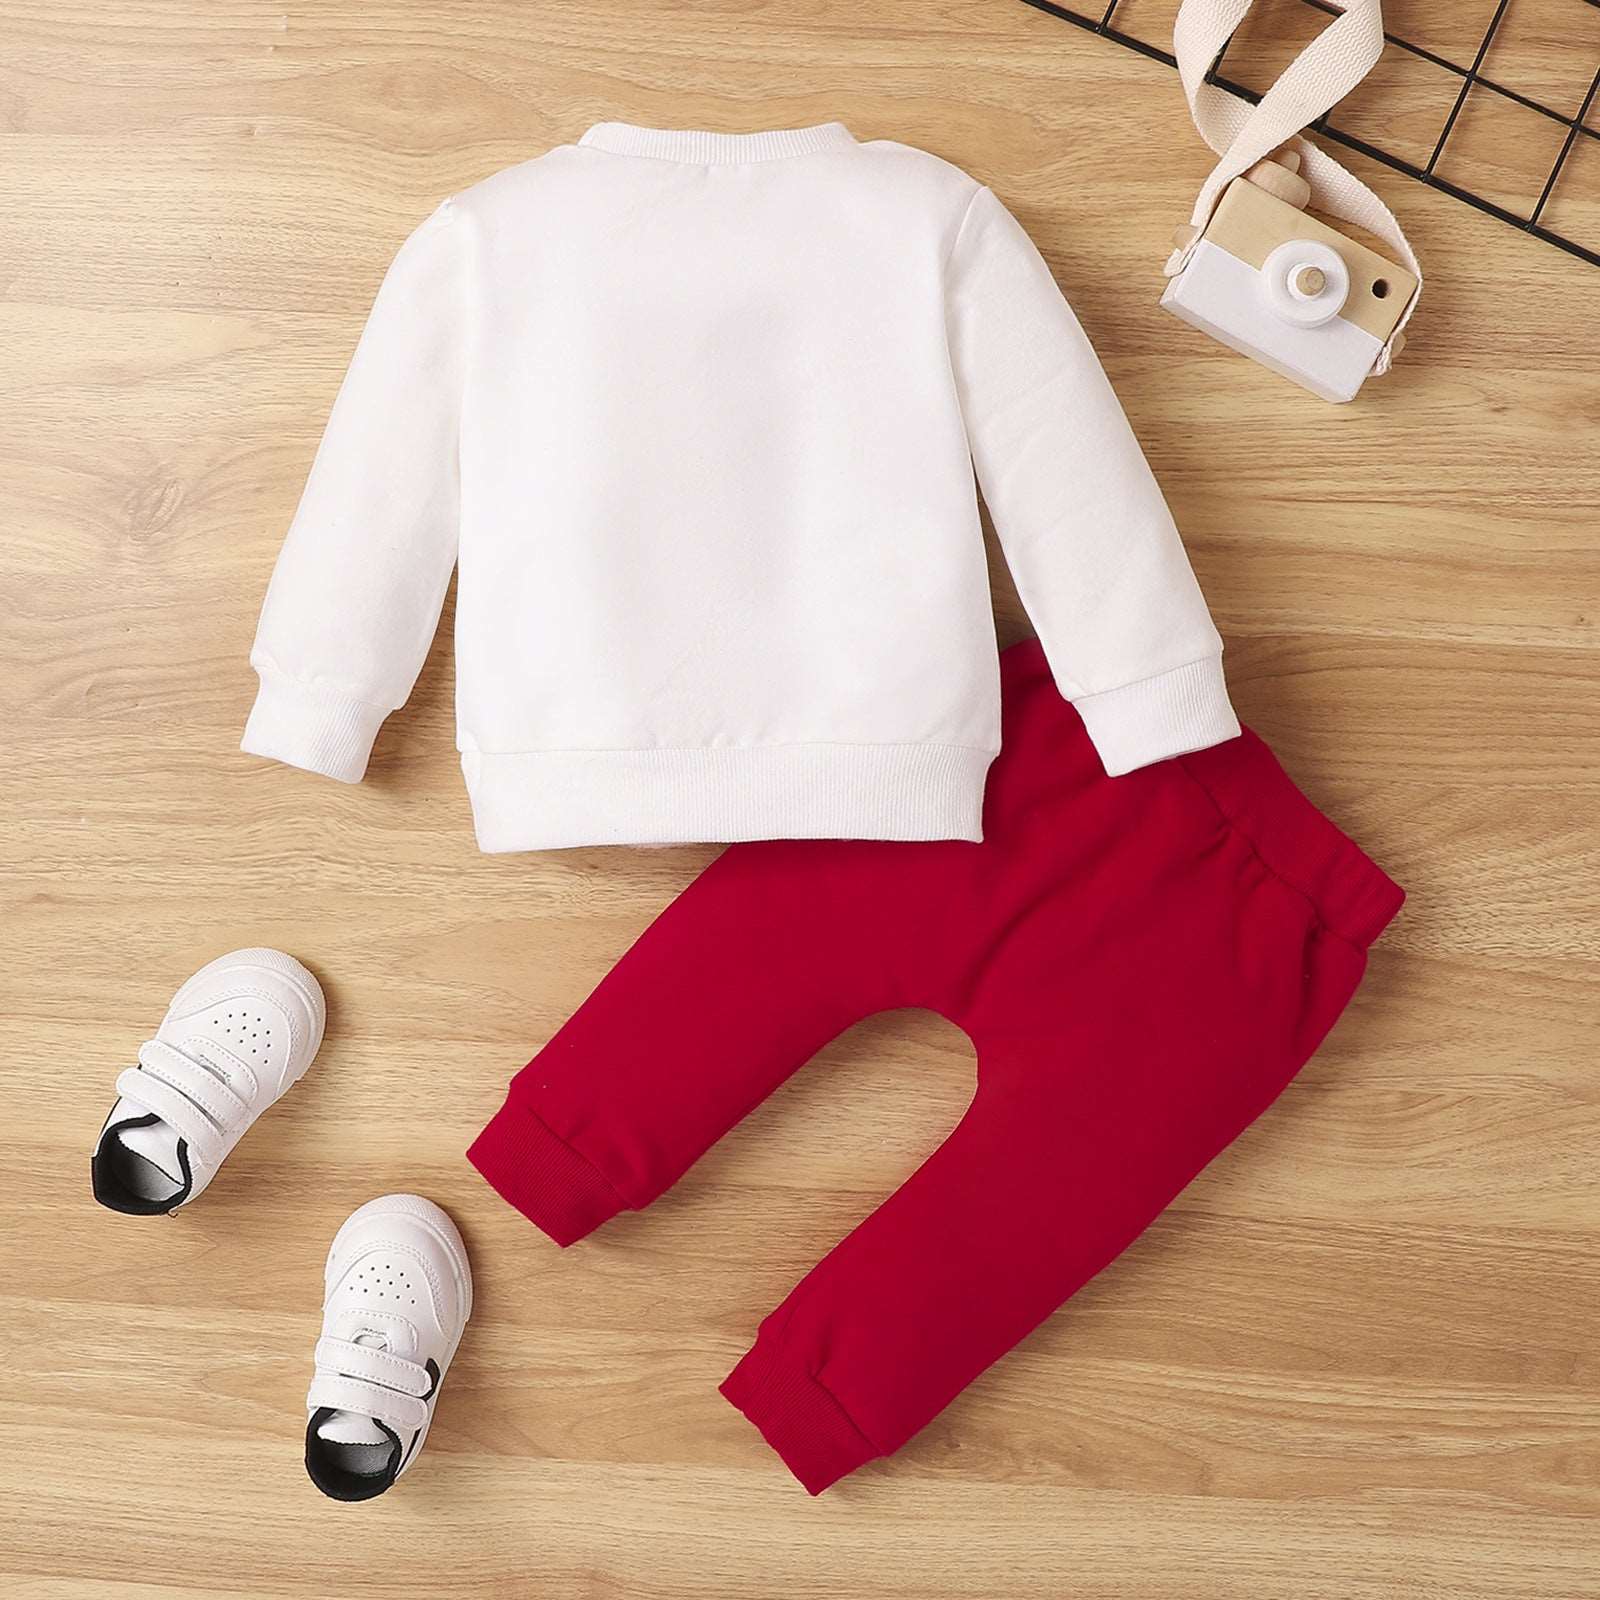 Baby Long Sleeved Sweatshirt and Pants Outfit Set